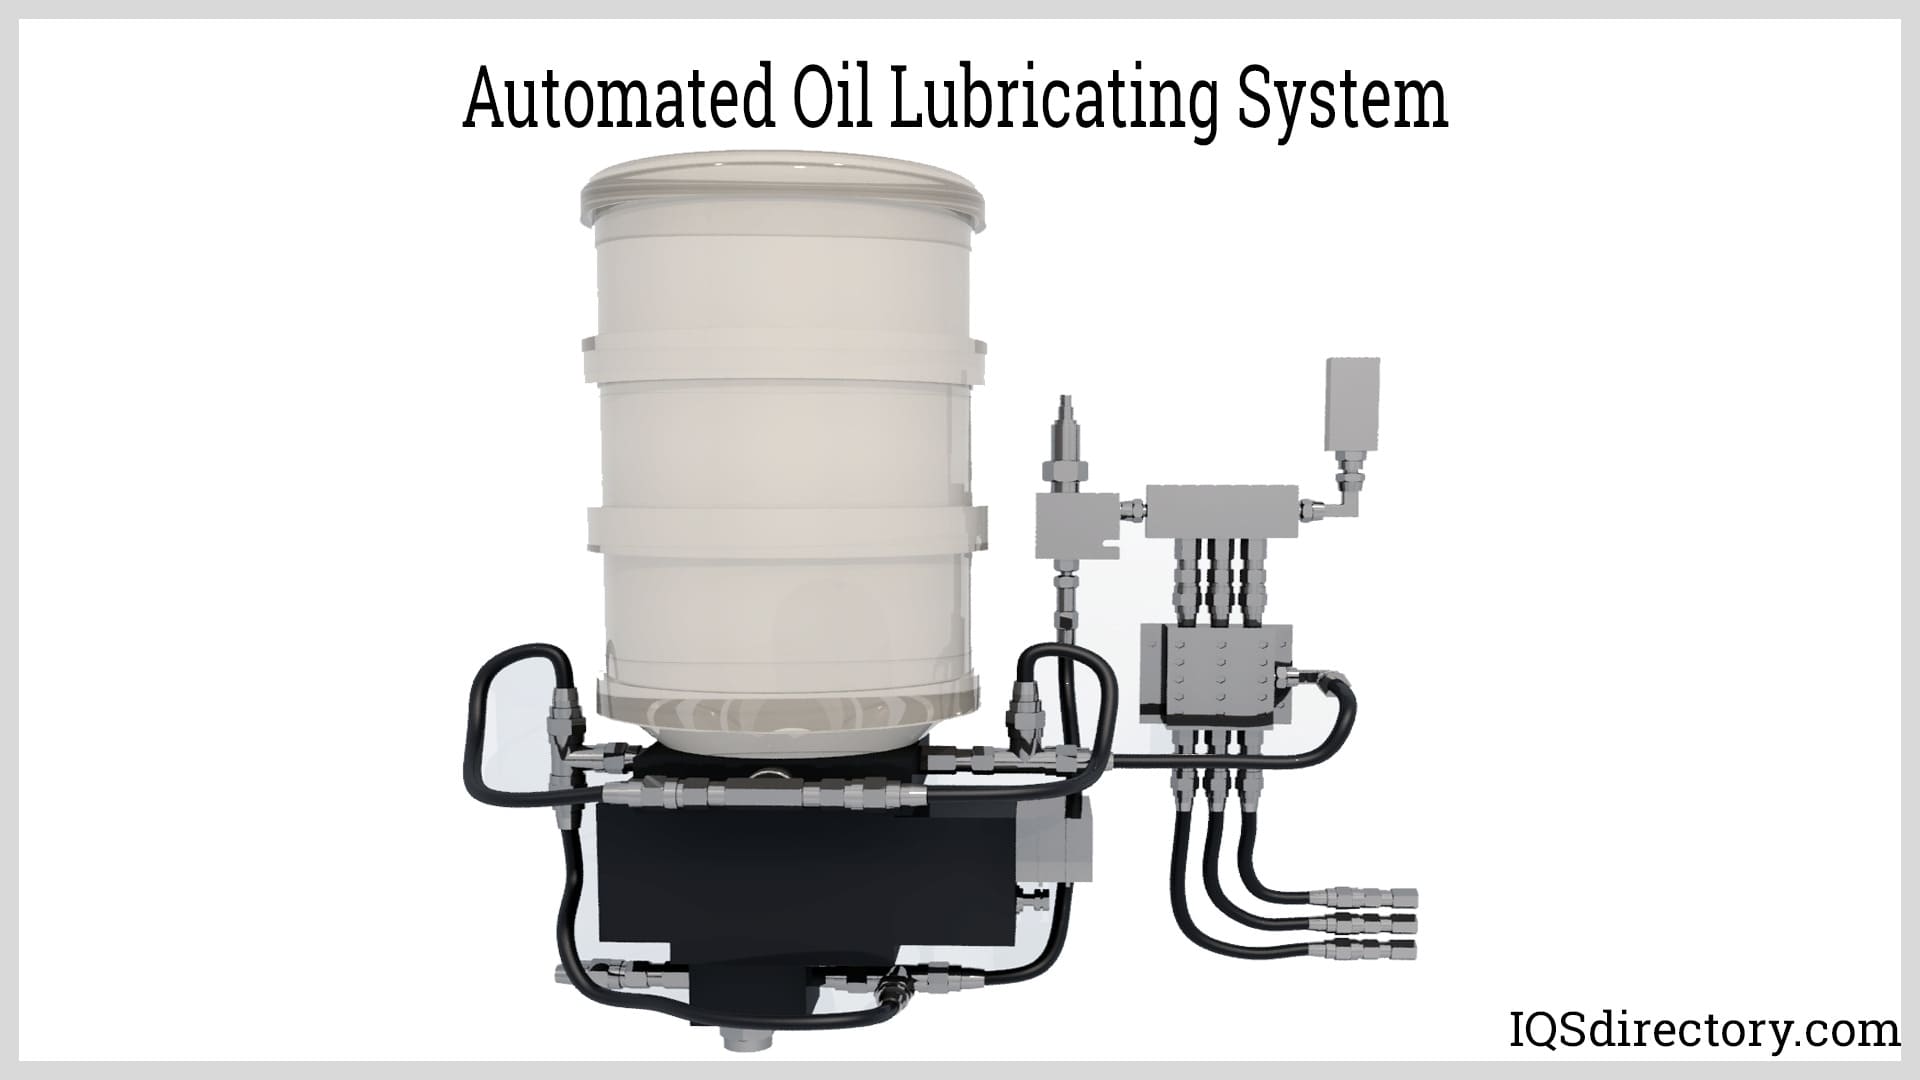 Automated oil lubricating system